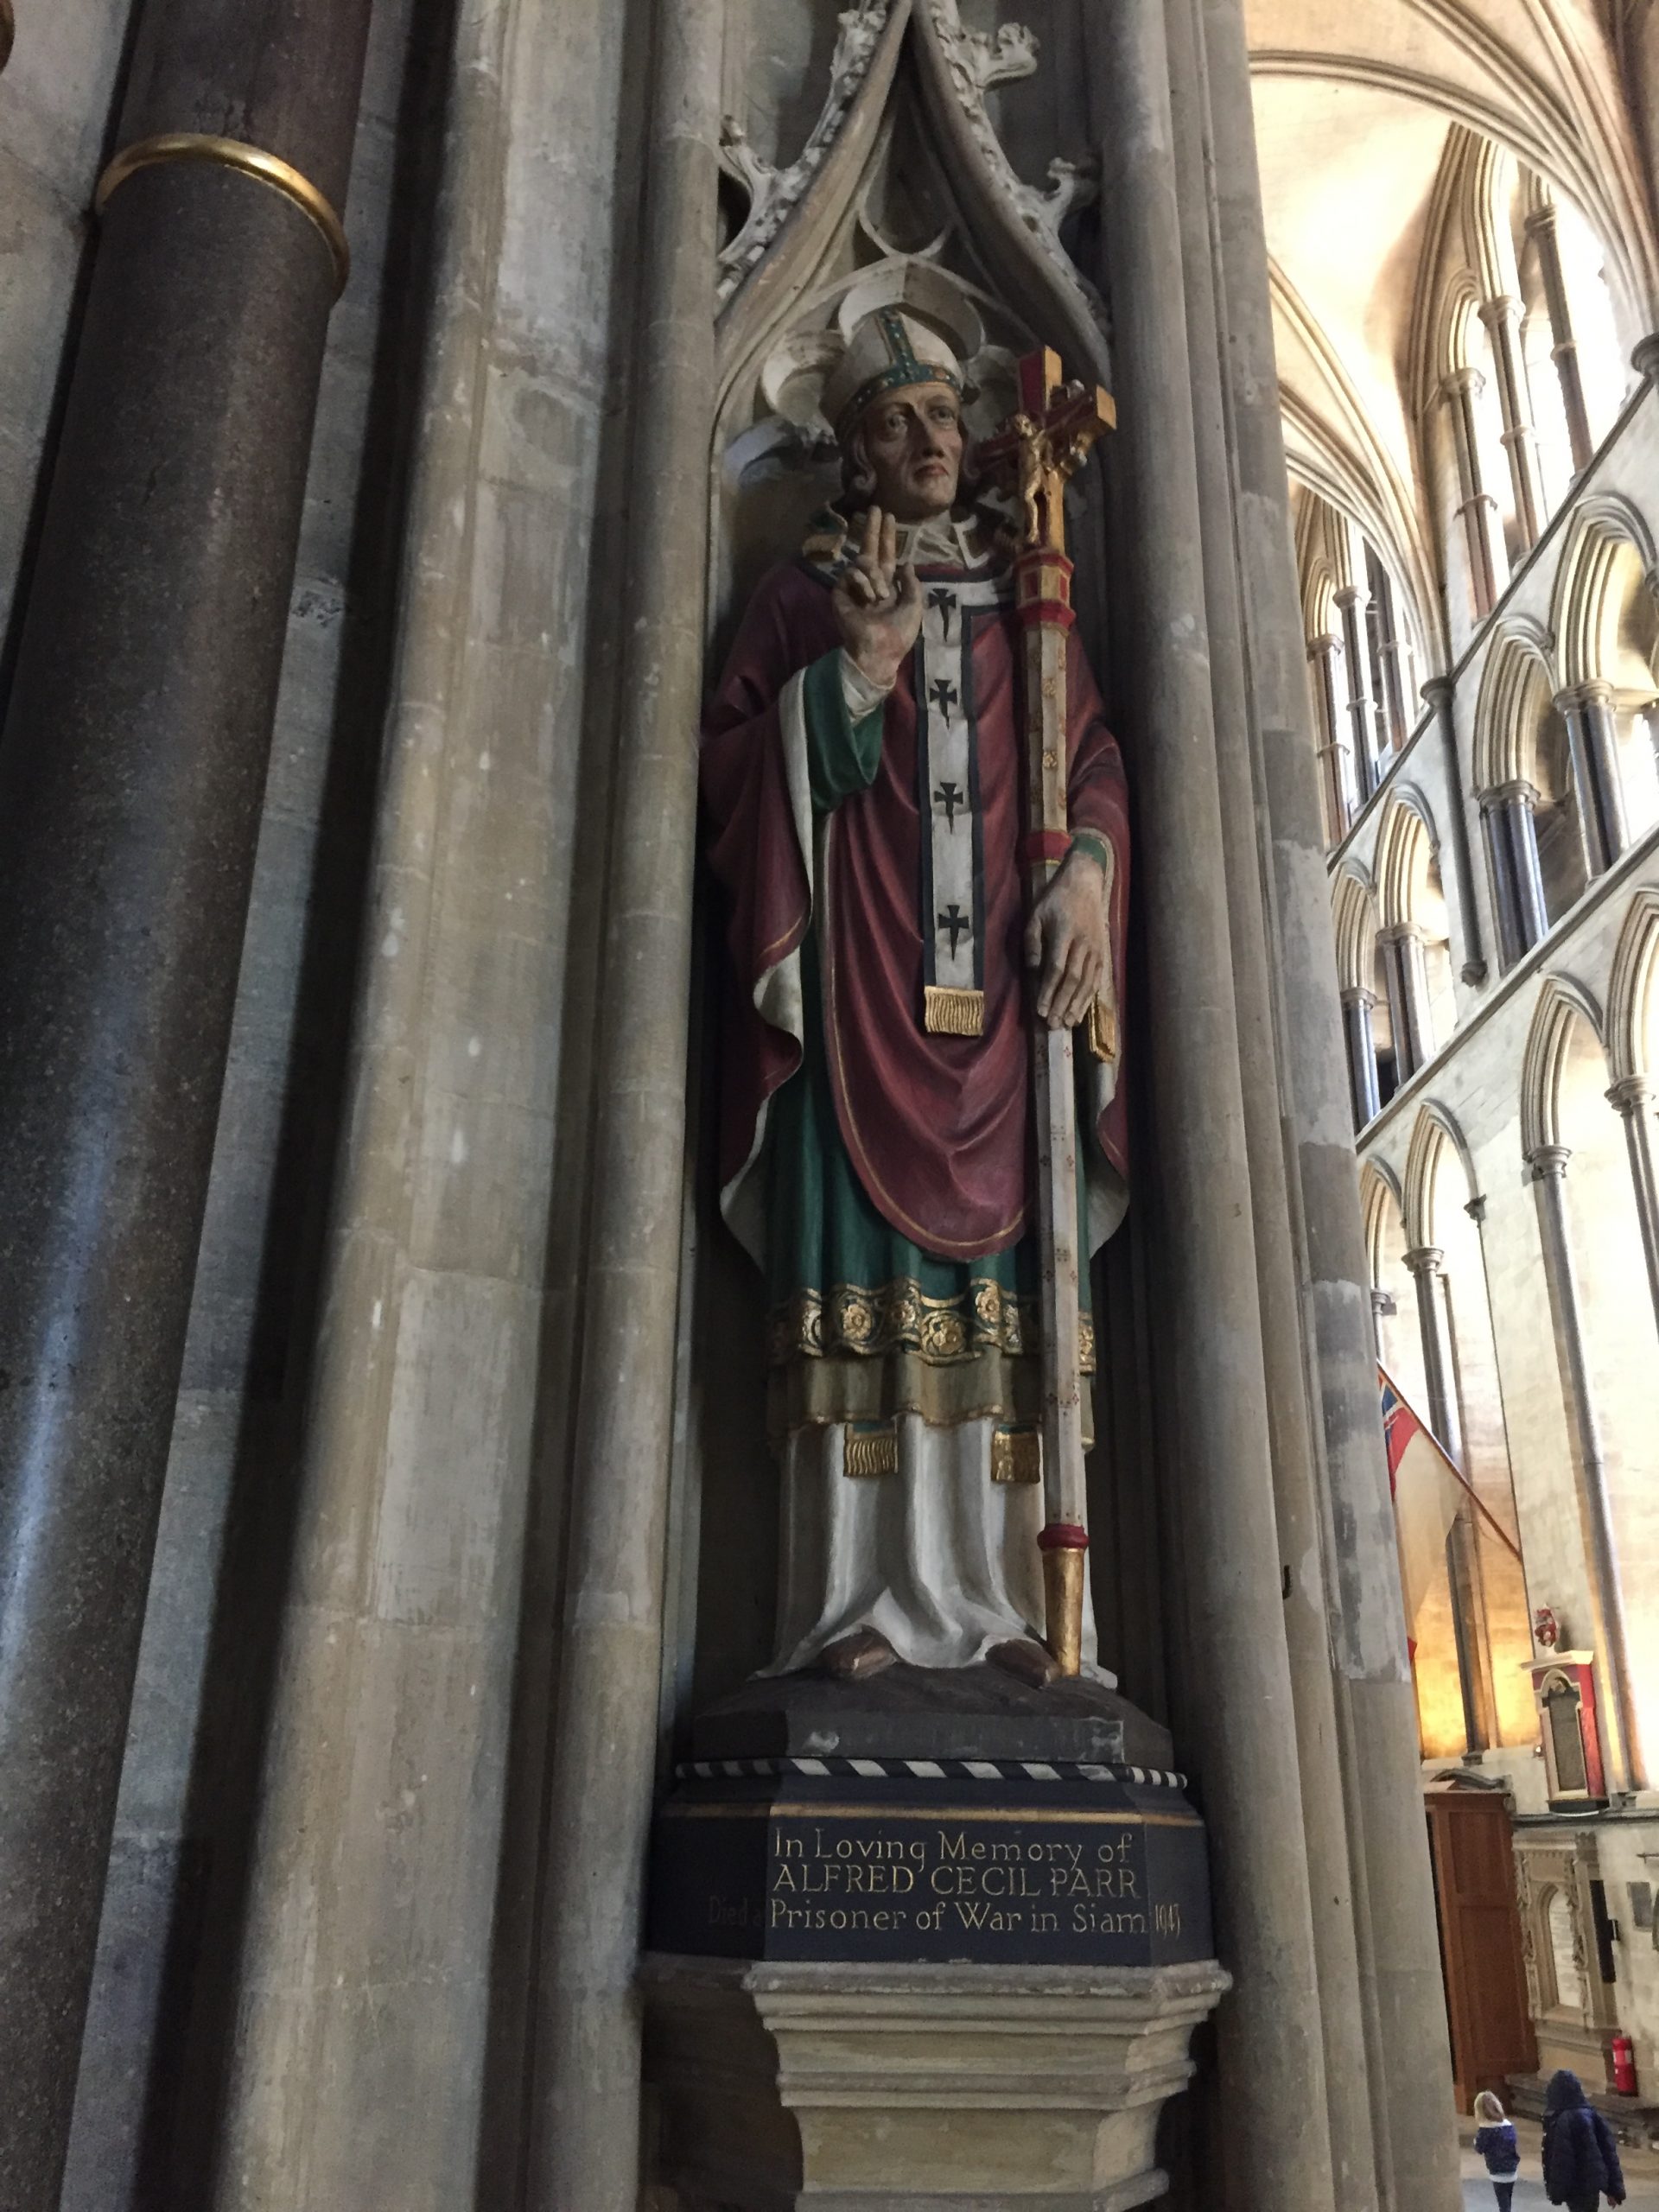 A sermon for the Feast for Edmund of Abingdon